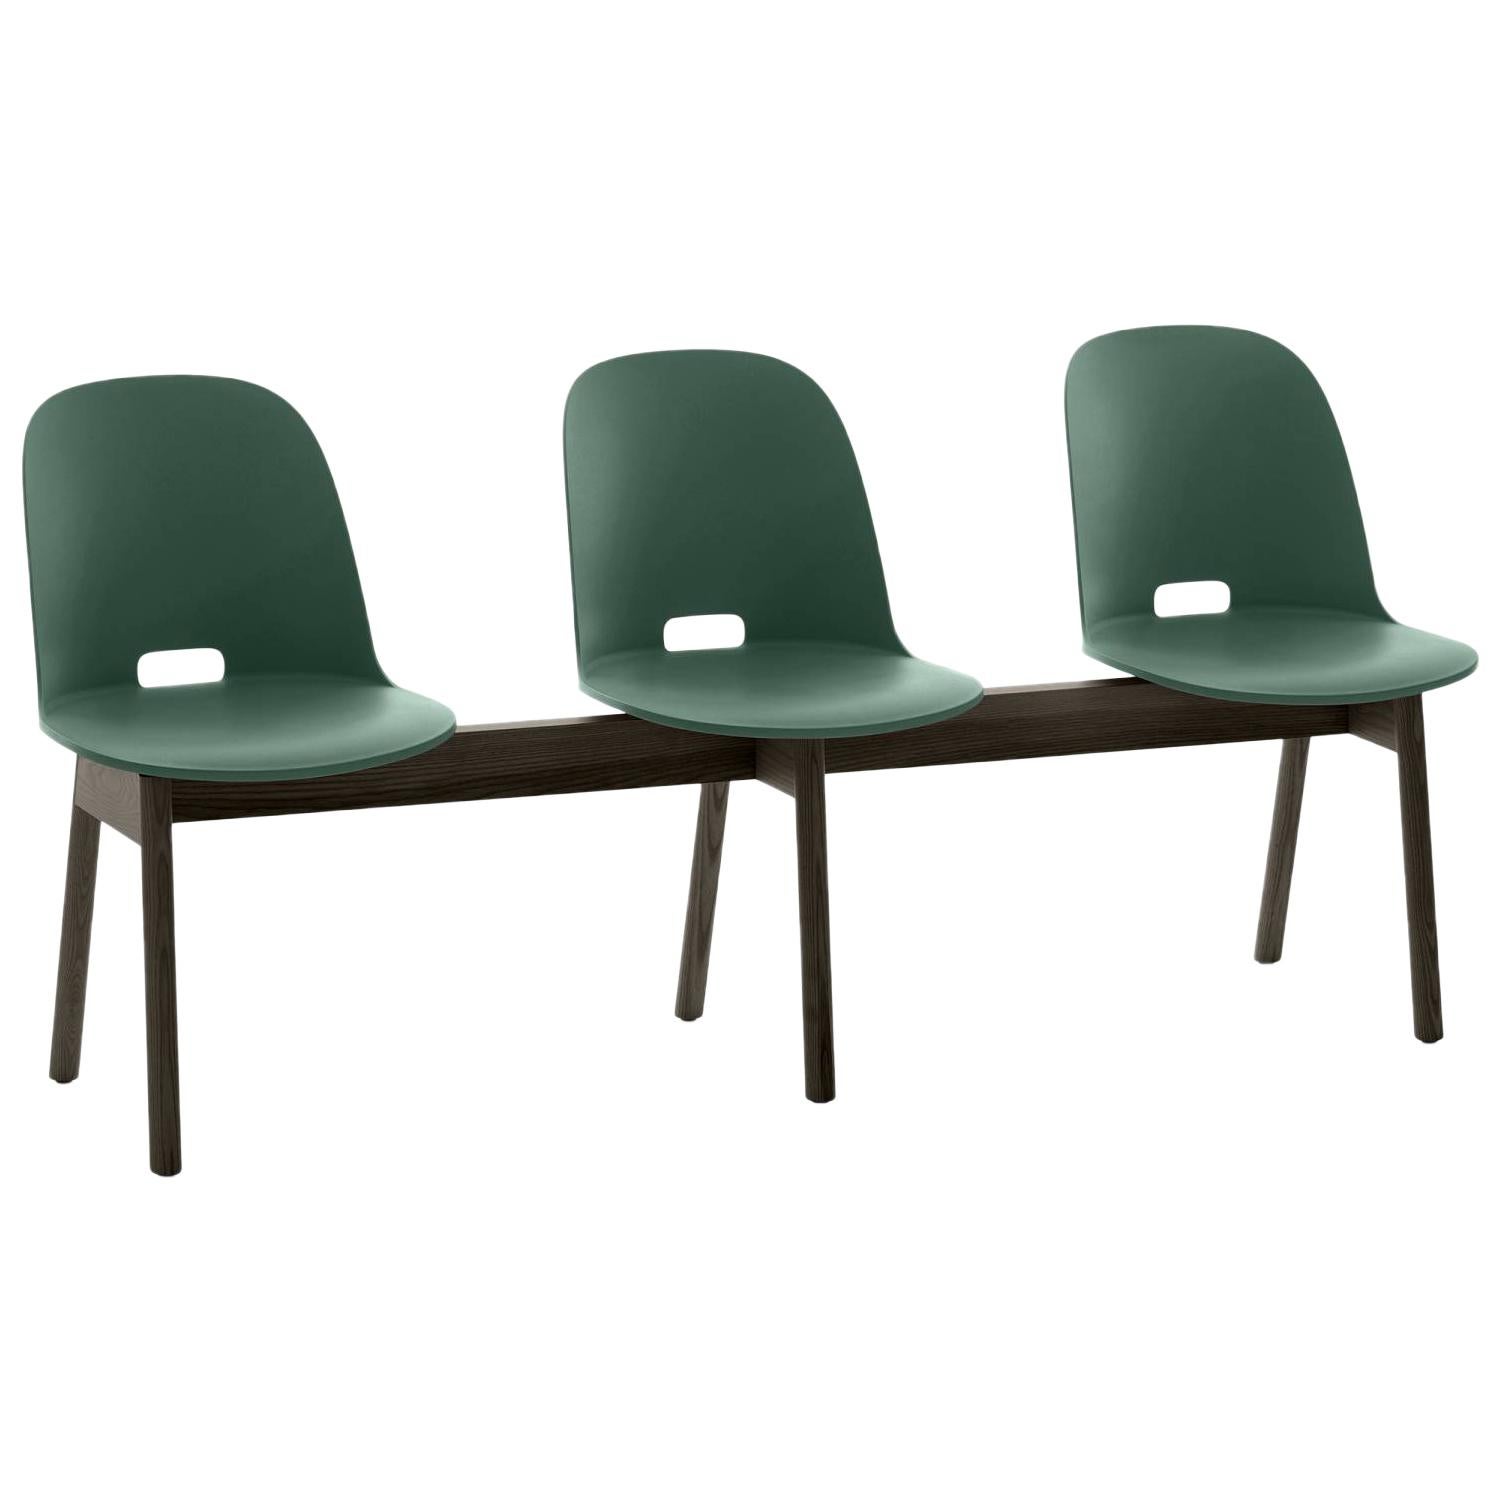 Emeco Alfi 3-Seat Bench in Green and Dark Ash with High Back by Jasper Morrison